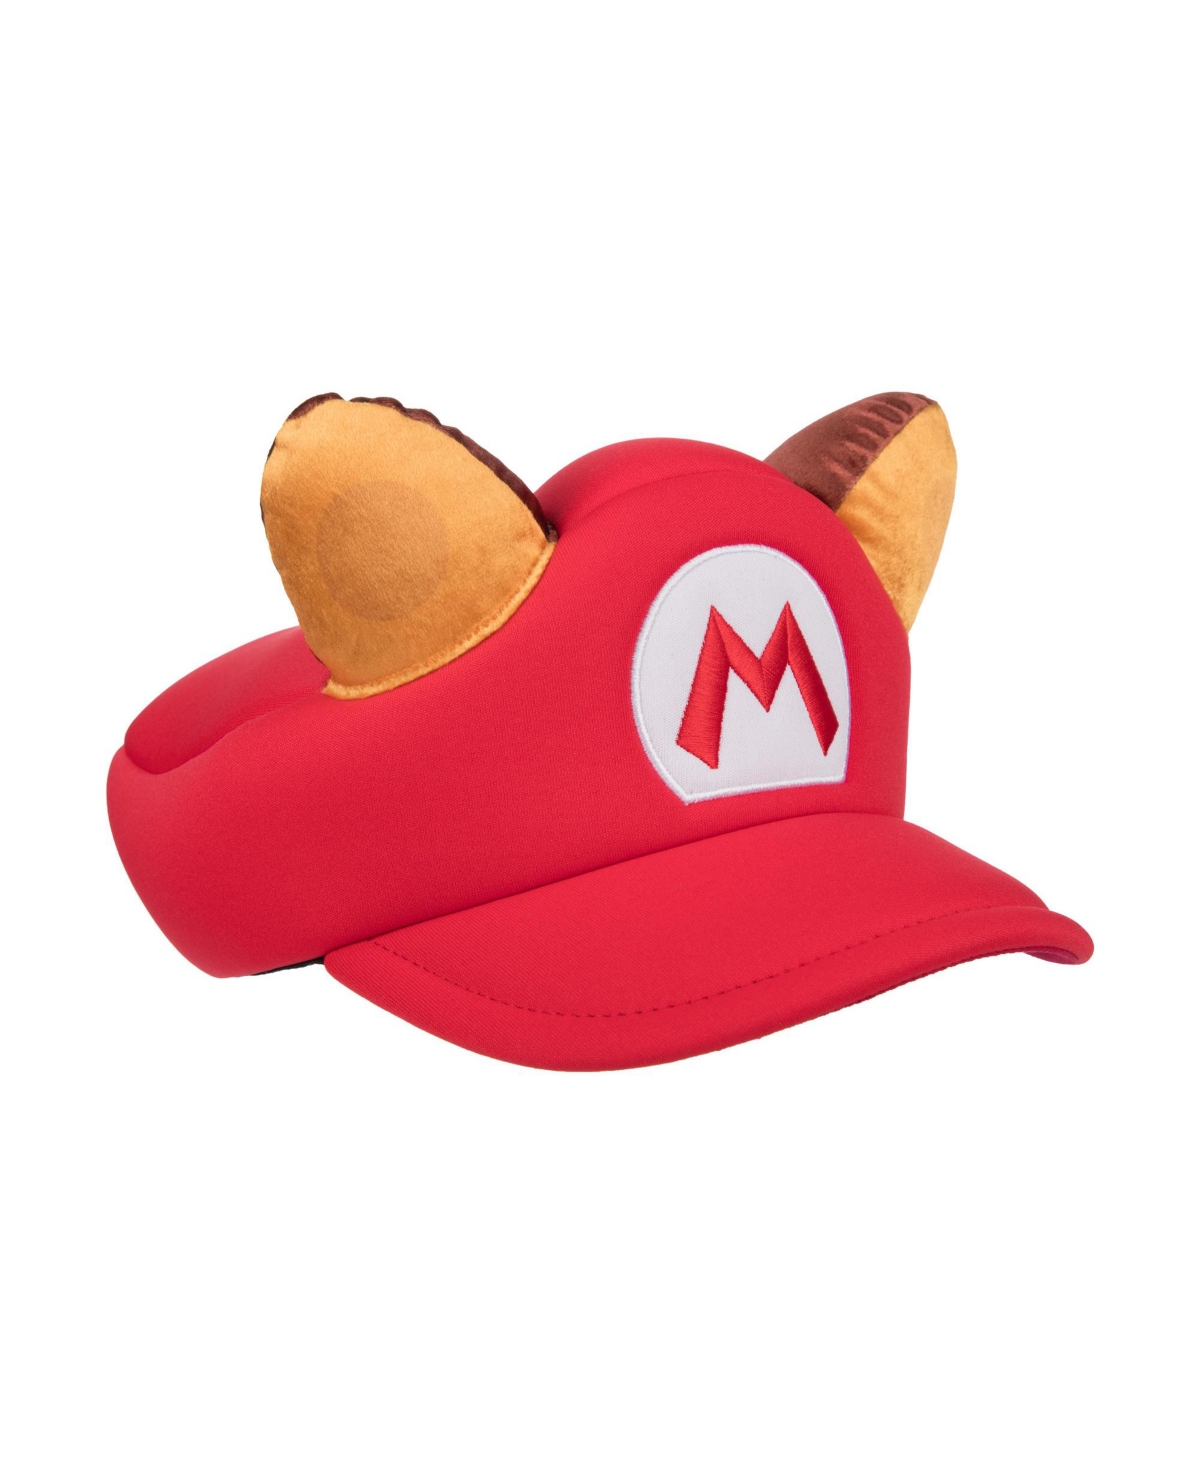 Men's The Video Game Raccoon Red Cosplay hat with ears - Multicolored